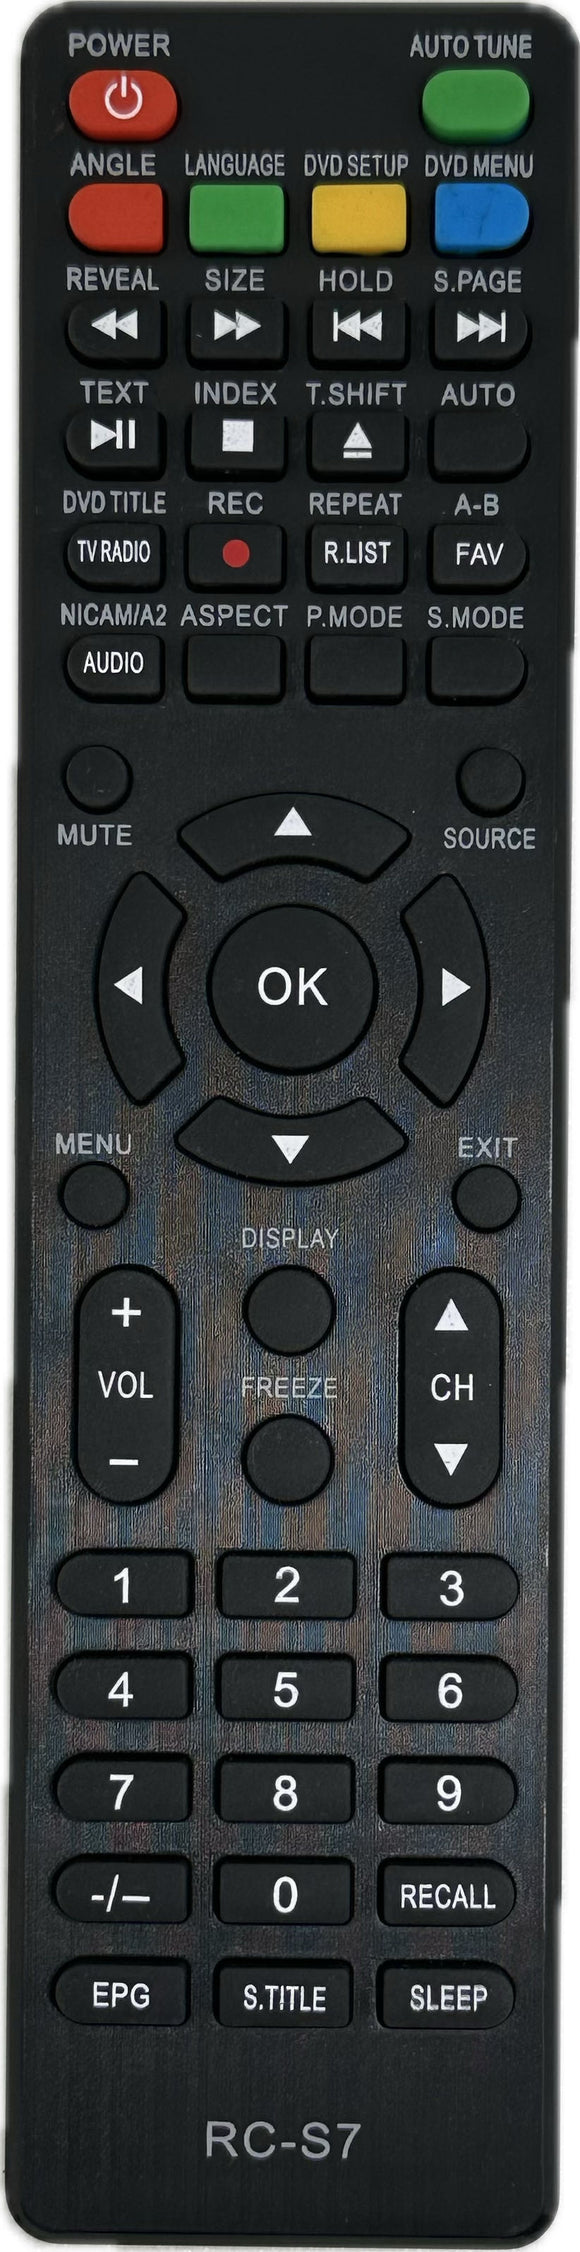 Sphere S7LED215BT TV Replacement Remote Control